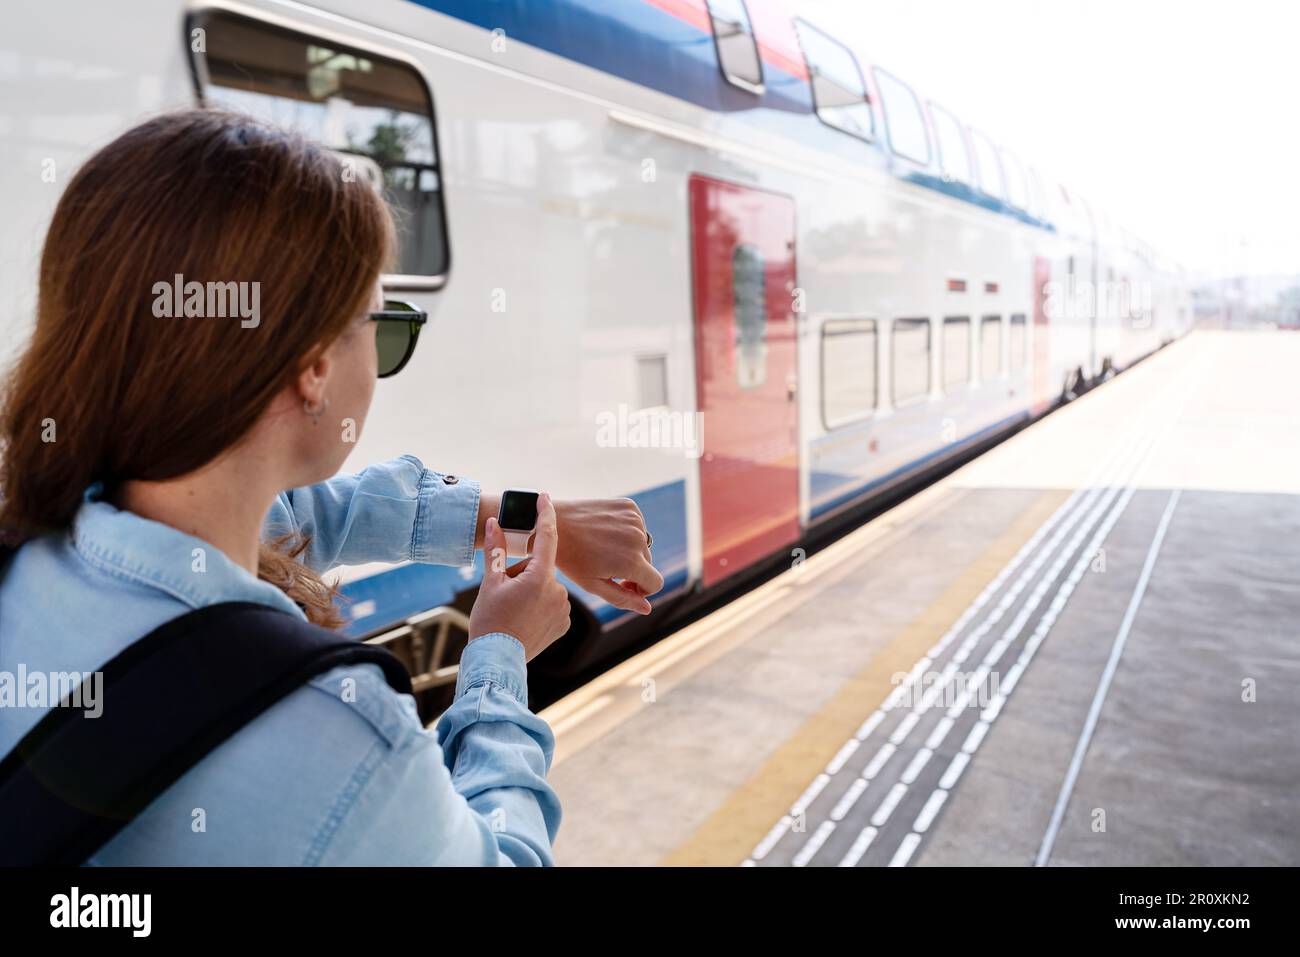 Woman waiting to board the train and looking at her wrist watch. Stock Photo